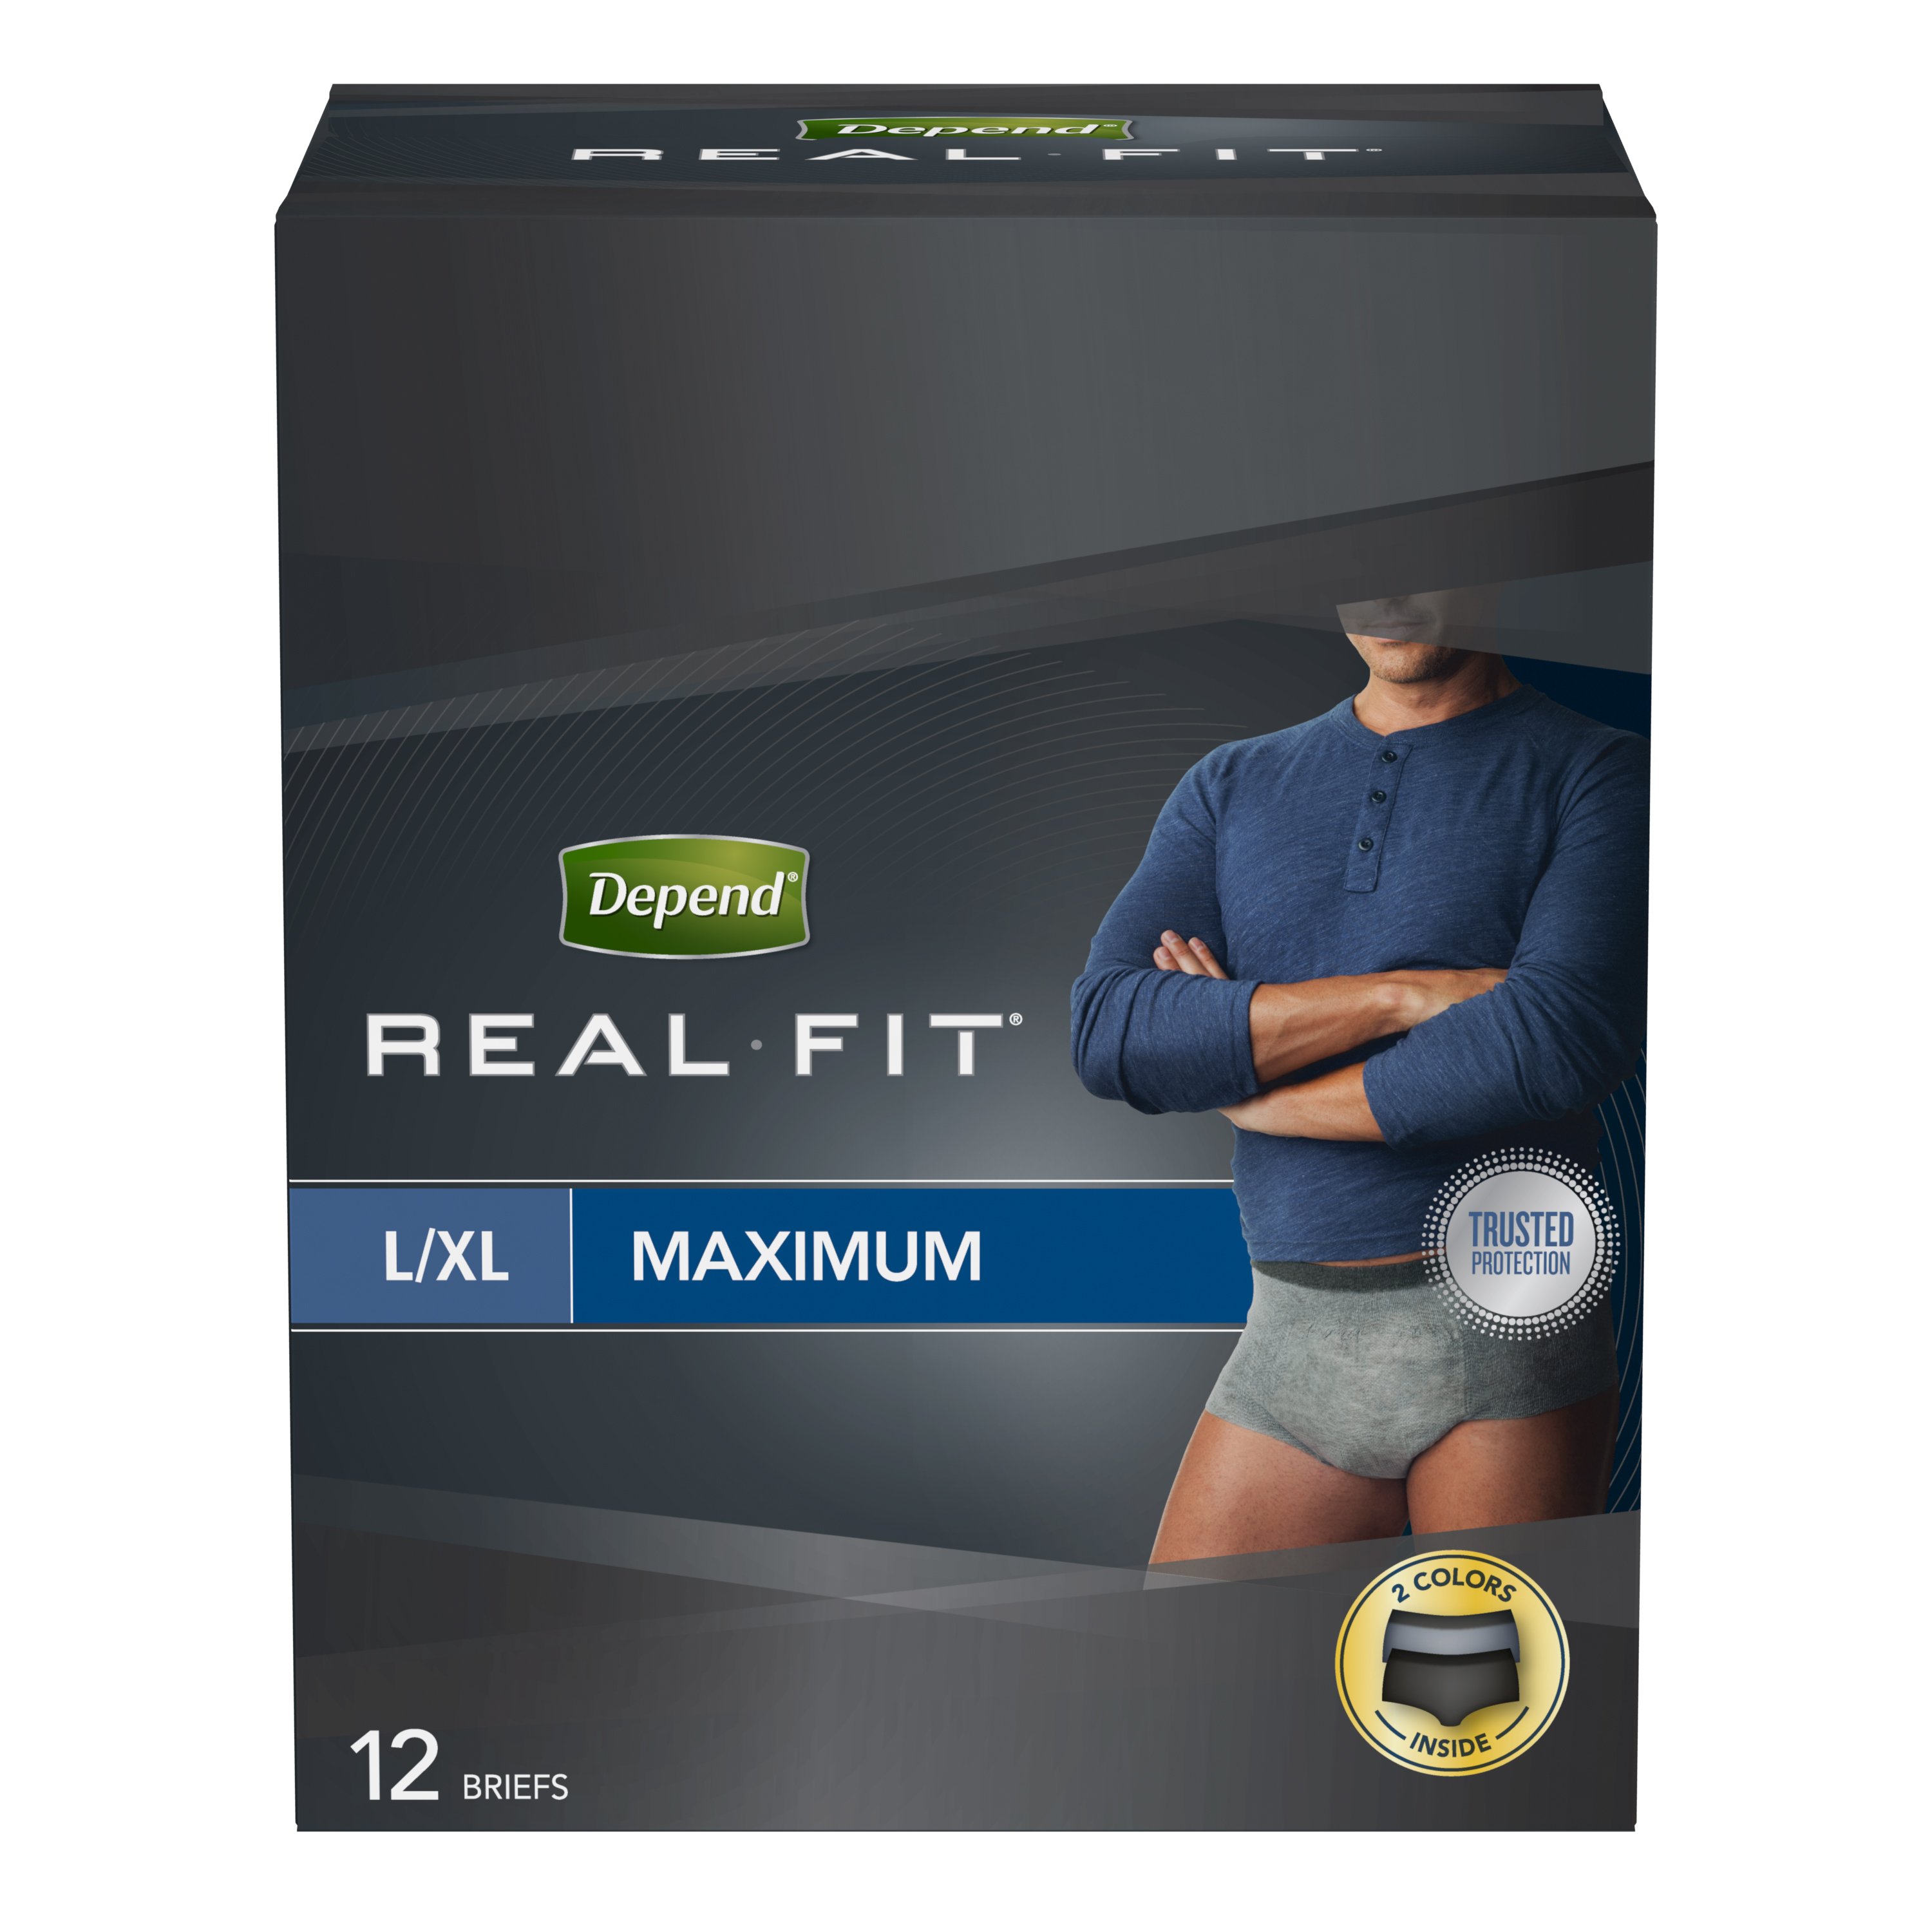 Save on Depend Men's Real Fit Skinguard Incontinence Underwear